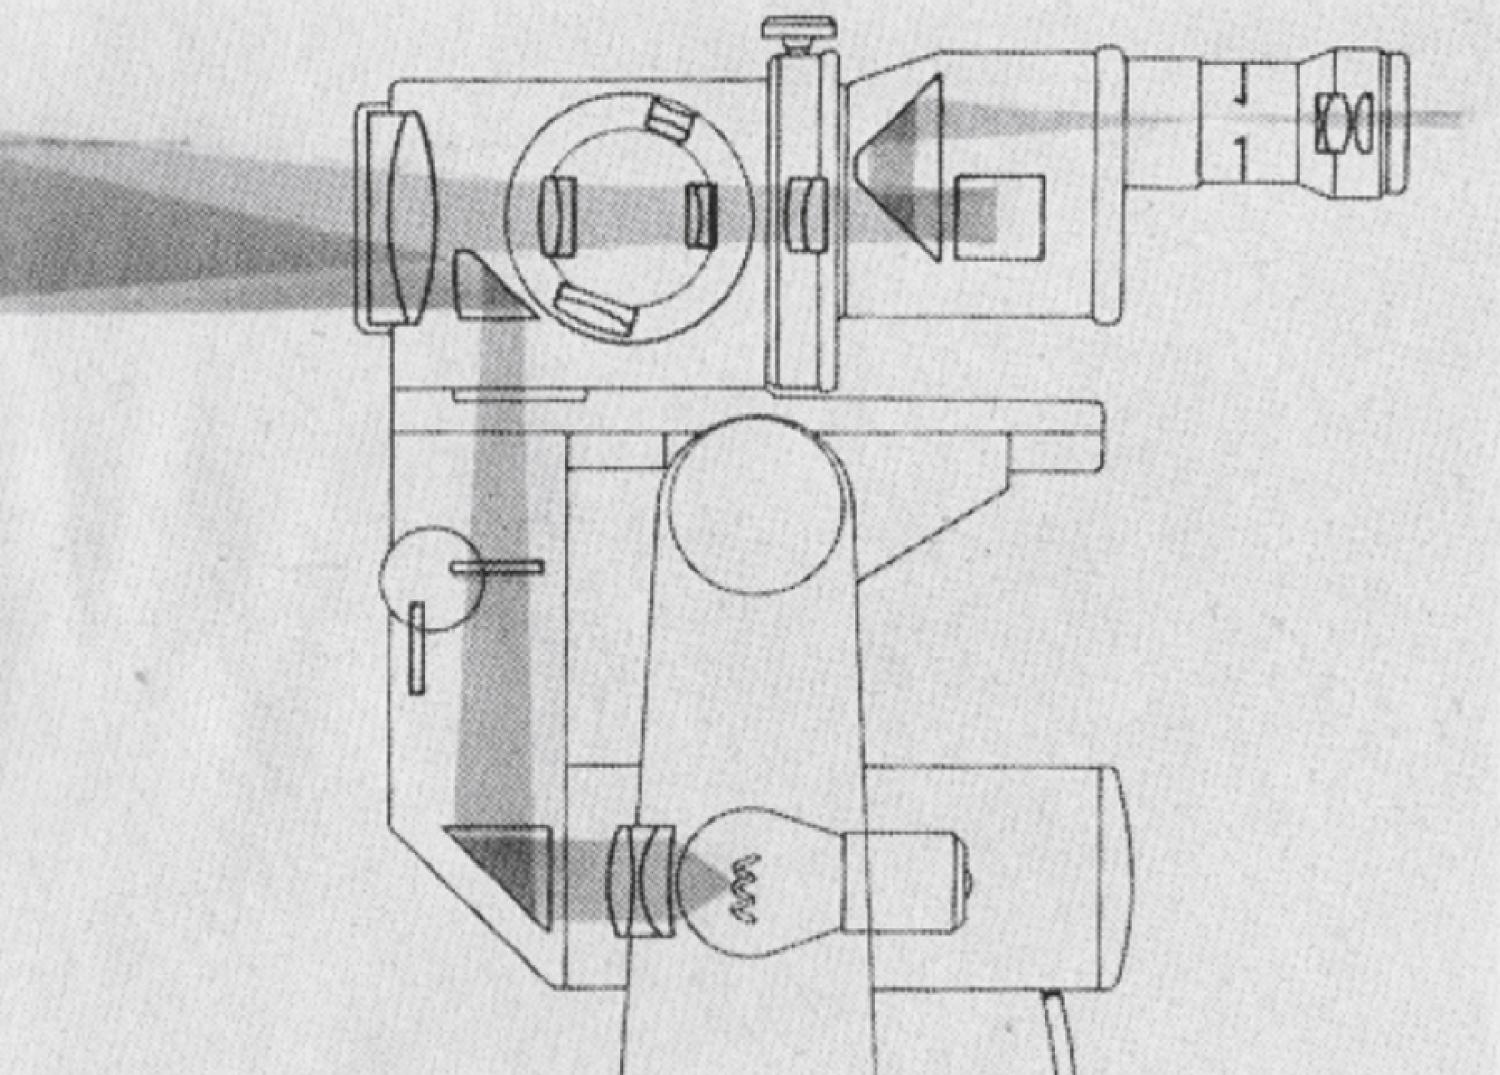 Figure 31.3, Diagram of the Zeiss OPMI 1 showing the pathway of local light source.